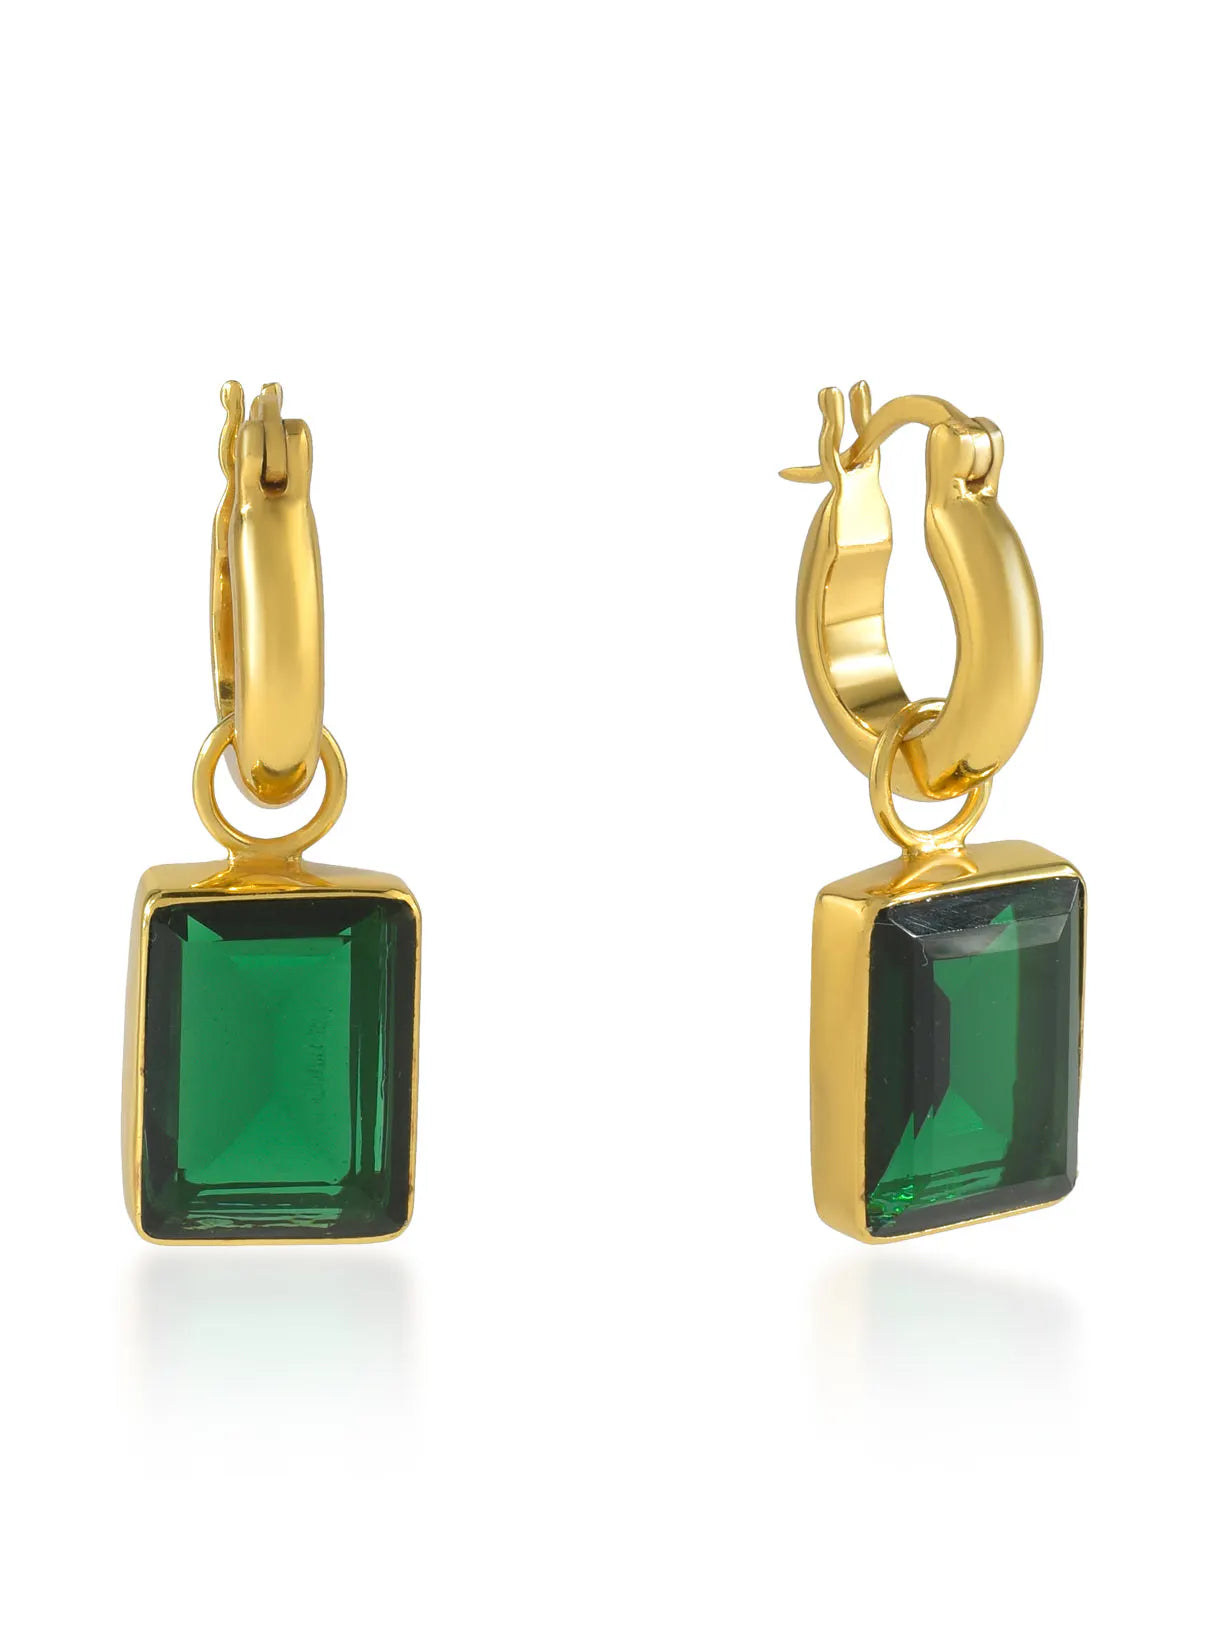 A pair of SHYLA - Sorrento Hoops- Gold with emerald green stones, featuring a high shine gold finish.